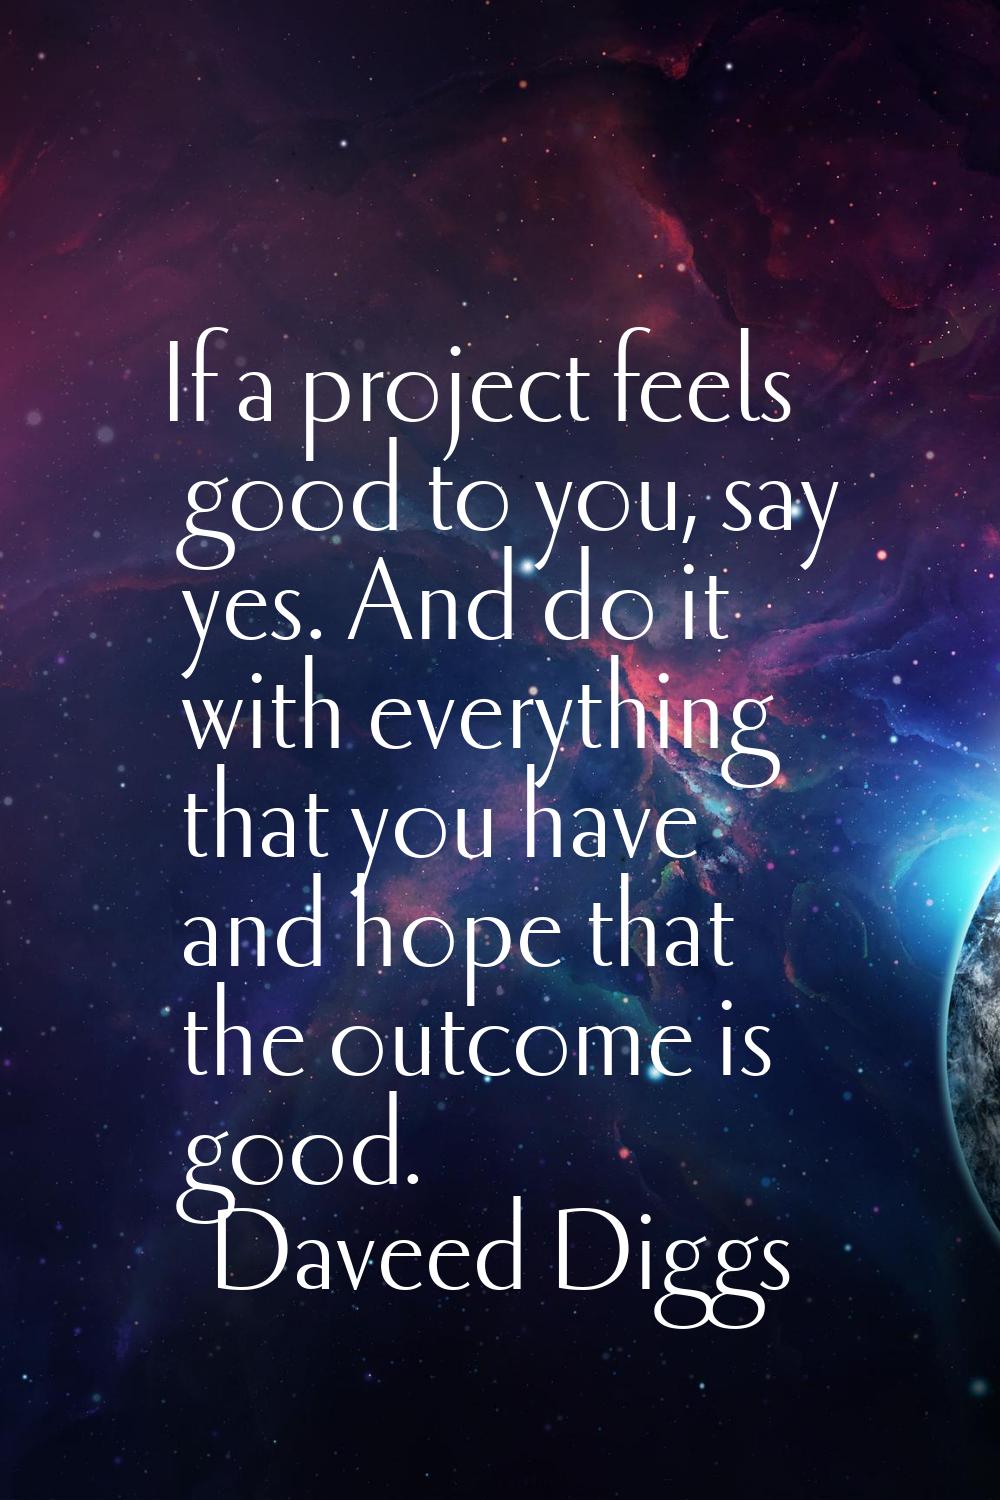 If a project feels good to you, say yes. And do it with everything that you have and hope that the 